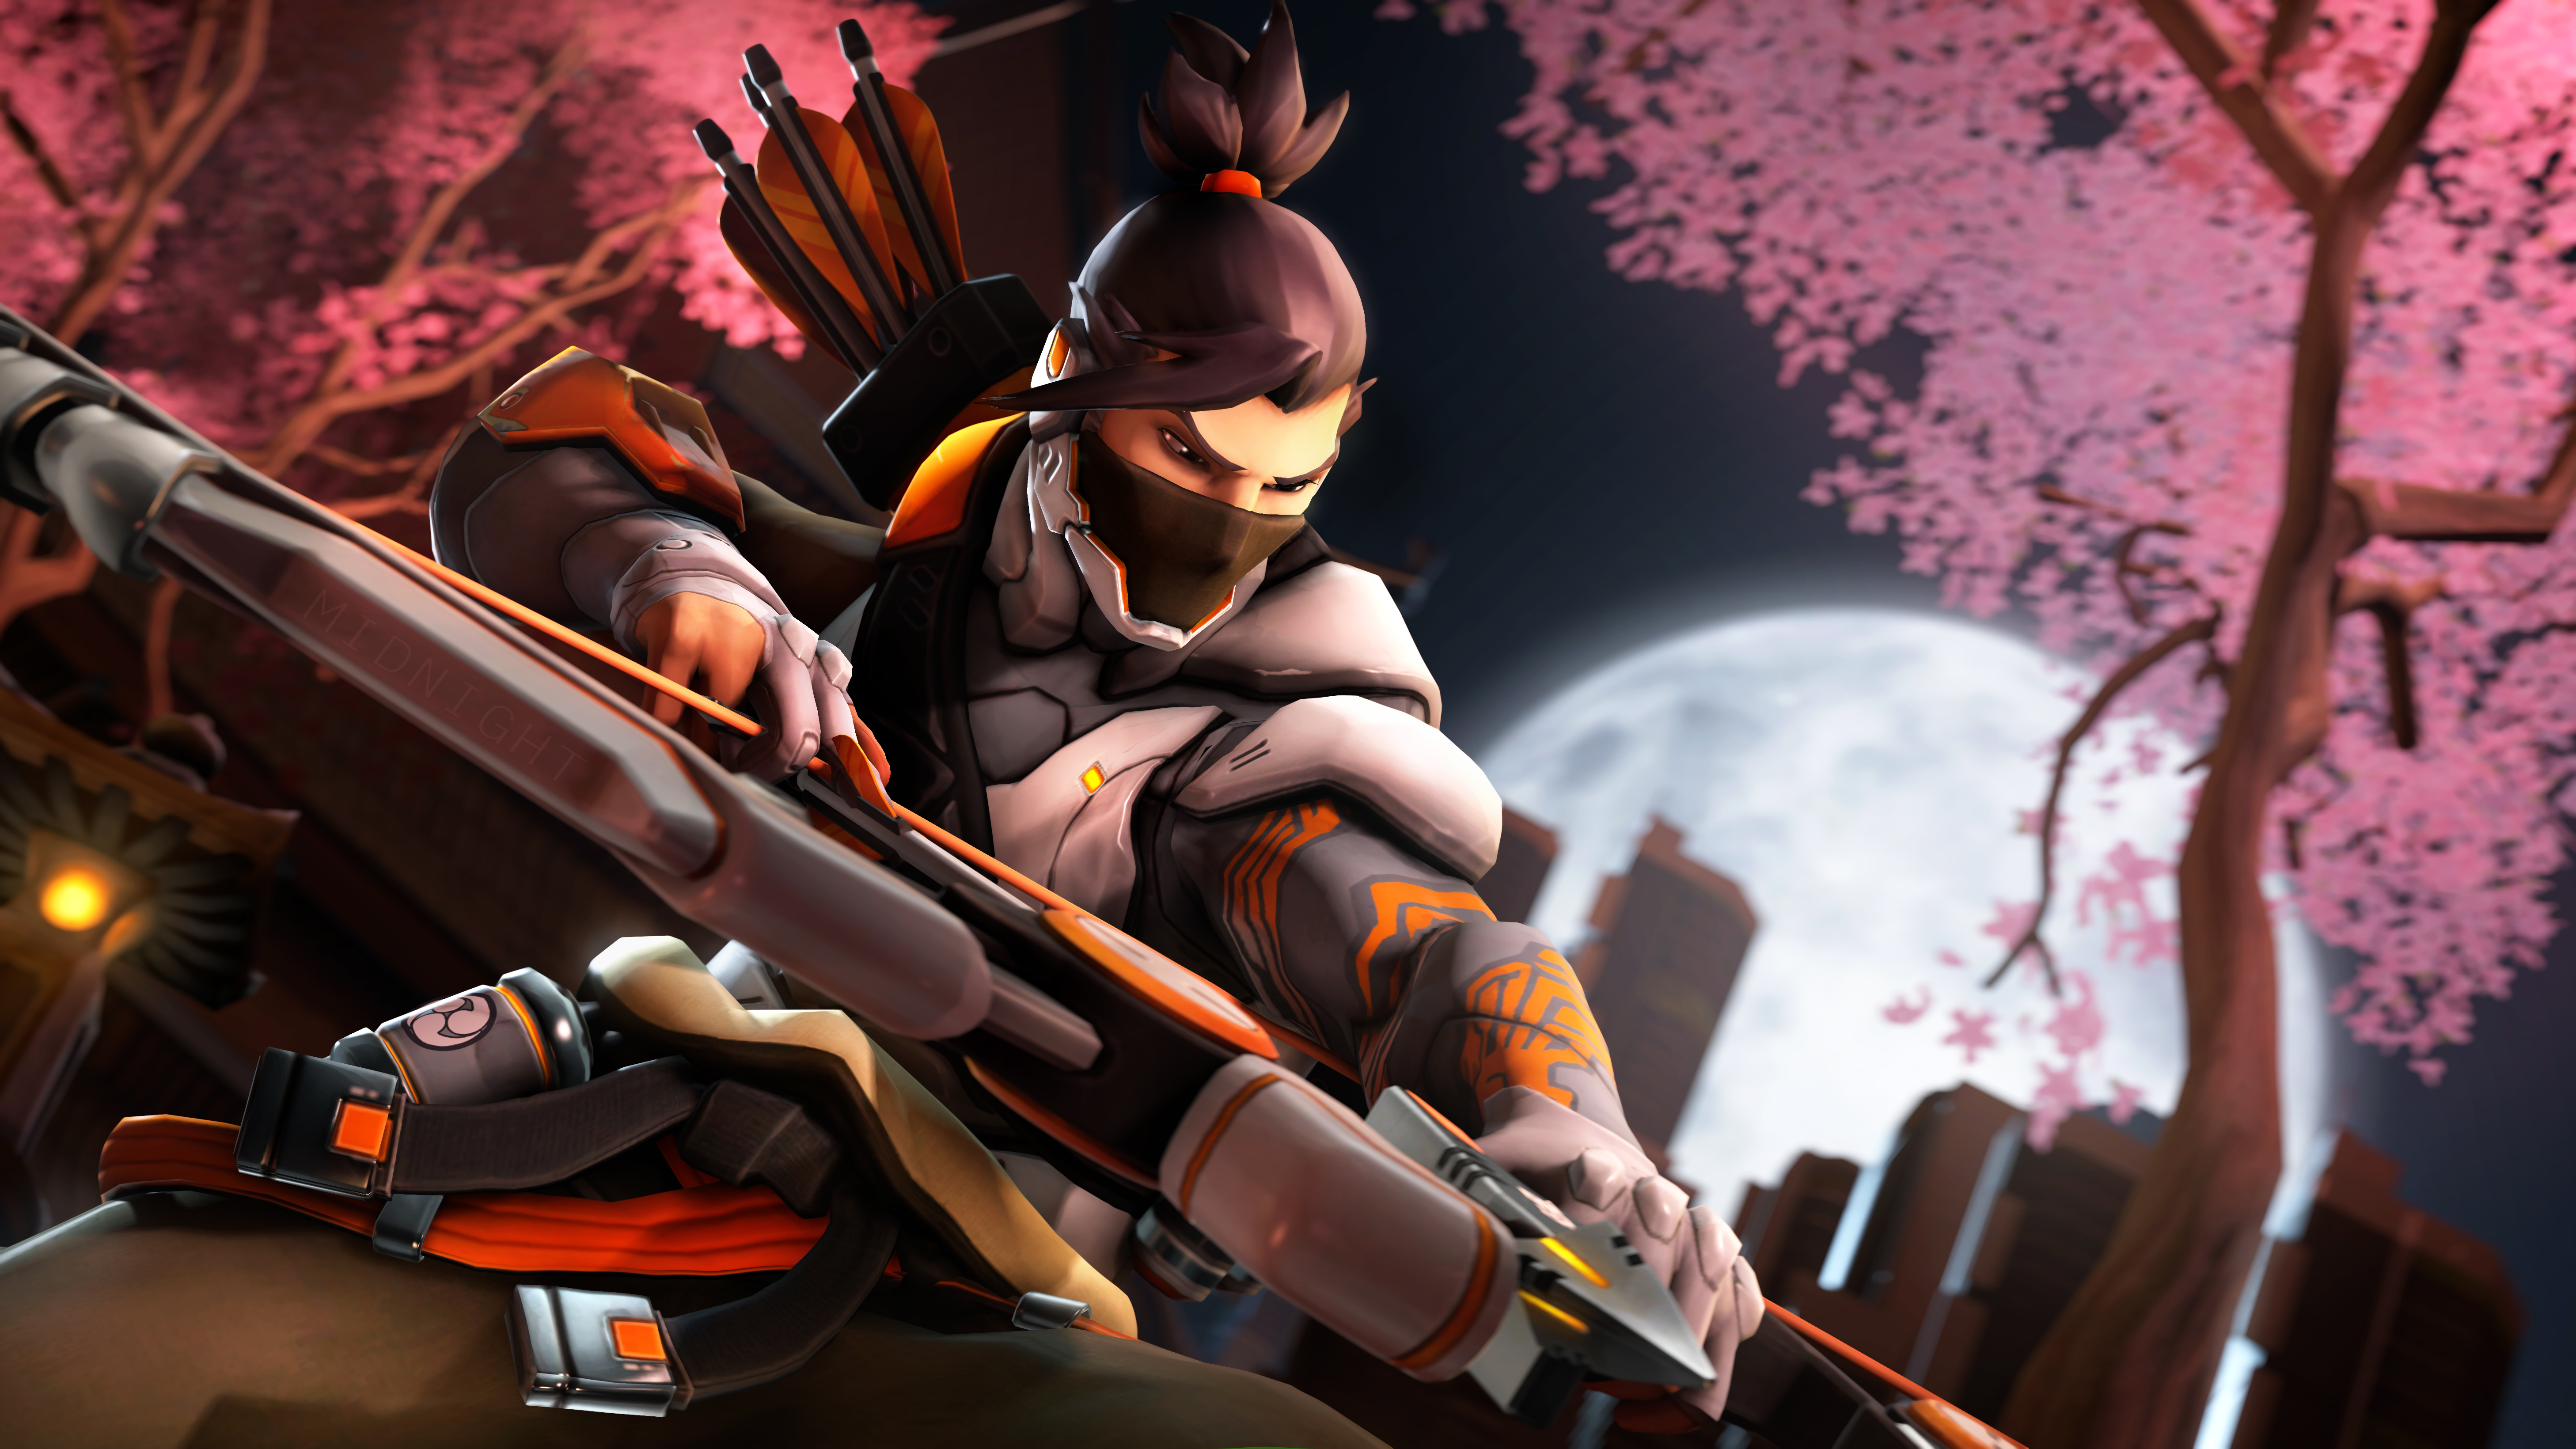 Cool Hanzo Wallpapers